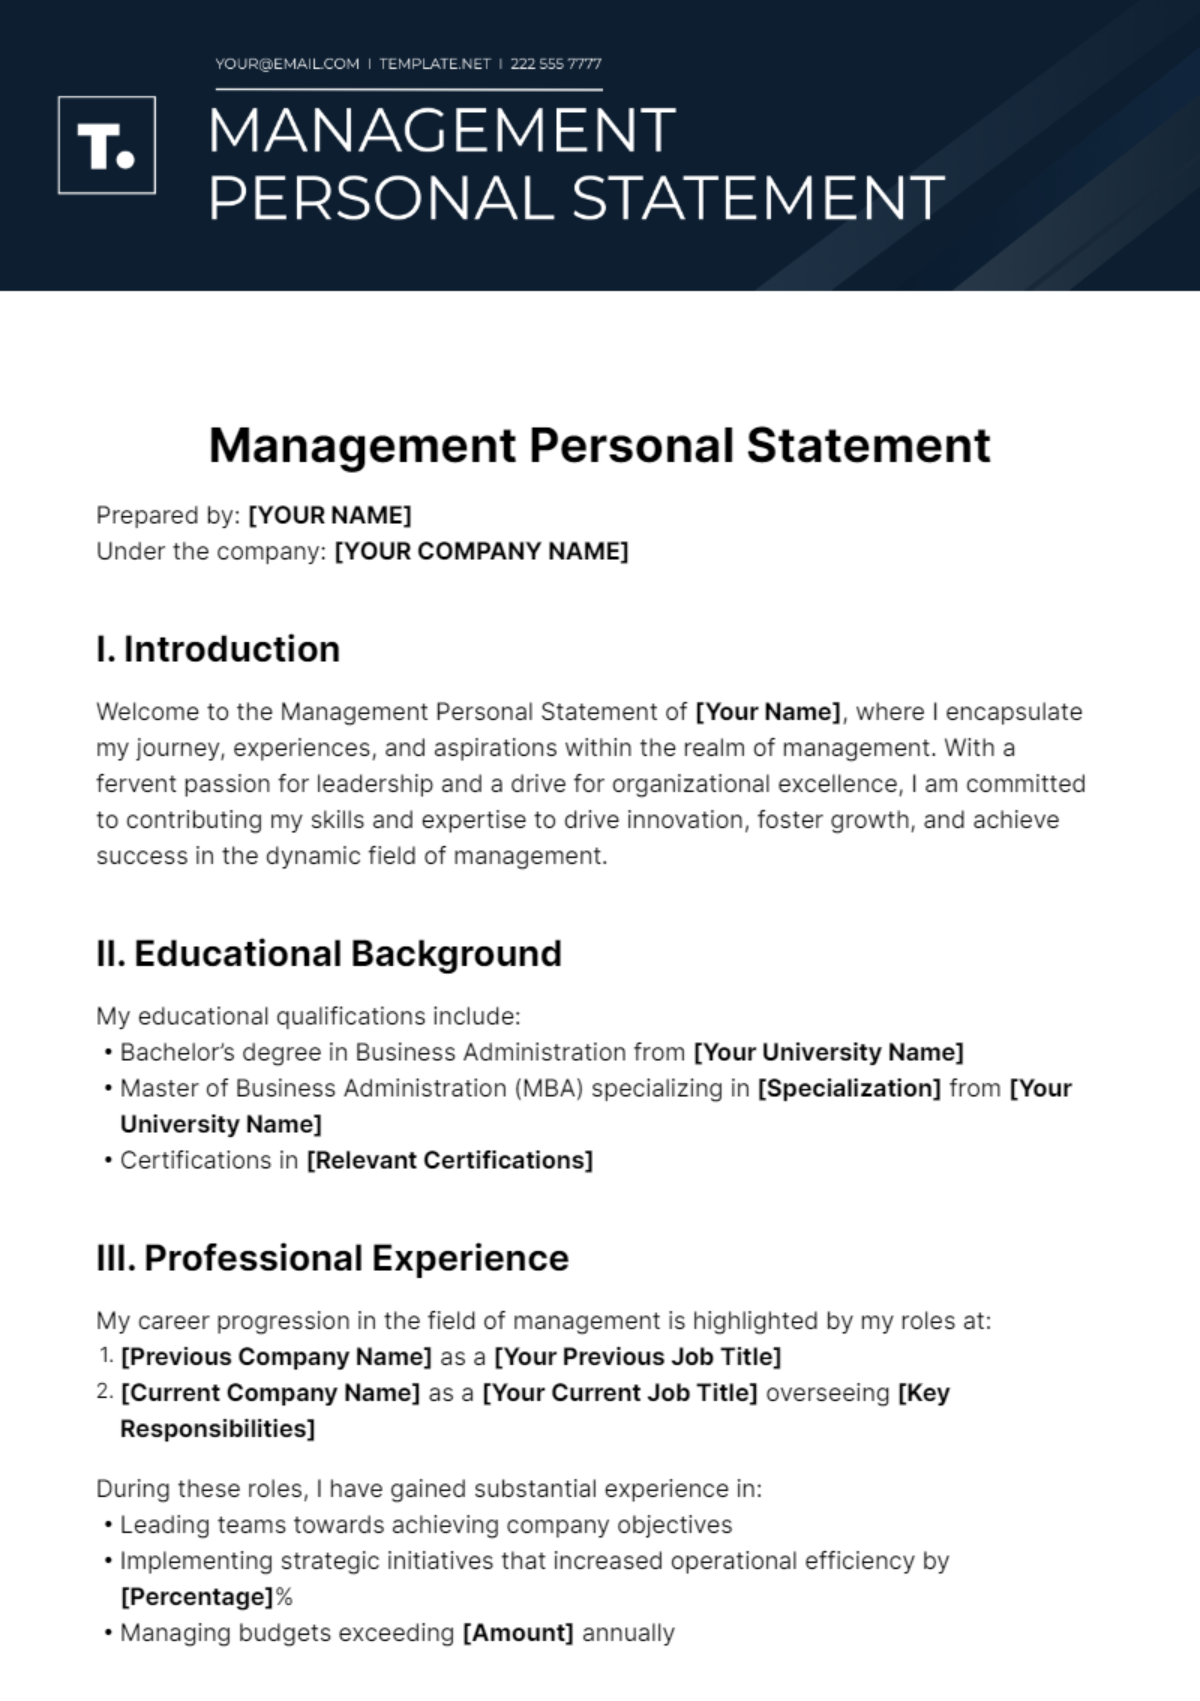 Free Management Personal Statement Template